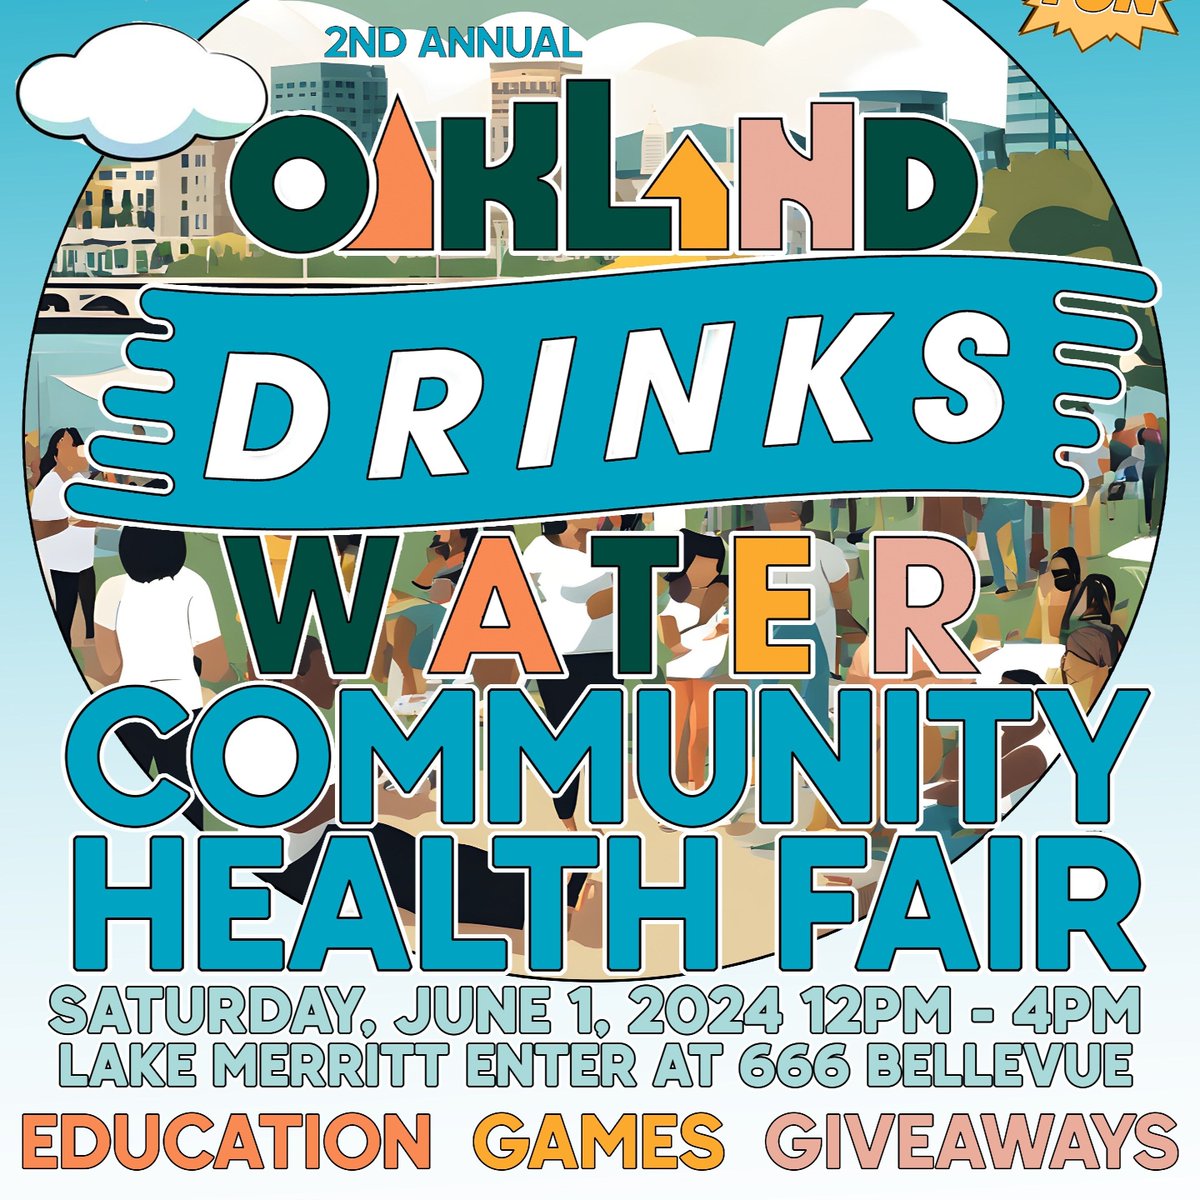 Come out this Saturday 6/1 to Lake Merritt for a free family-friendly health fair. Enjoy food, games & activities while promoting a healthy lifestyle. 12-4pm at 666 Bellevue Ave. Accessible via 19th St. BART, AC Transit lines NL, 57 & 12. See you there!👨‍👩‍👧‍👦